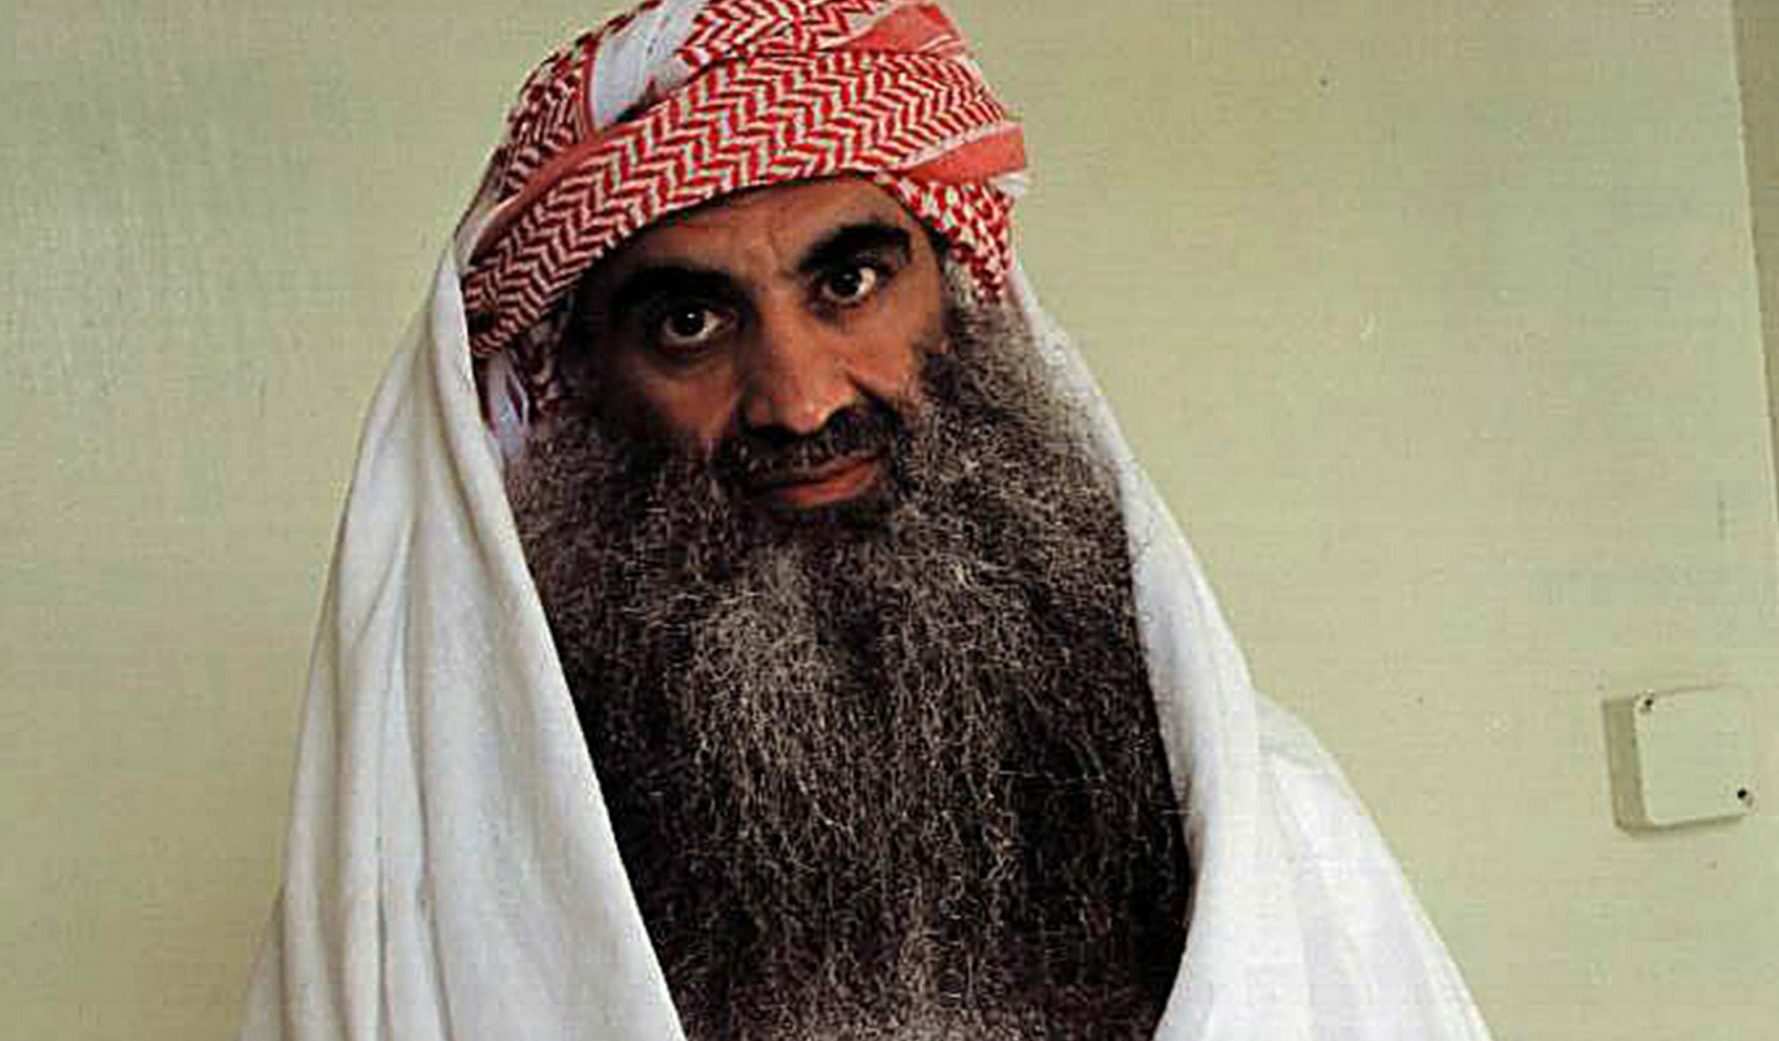 9/11 terrorist mastermind, 4 others could get plea deal from US gov’t 21 years after attack